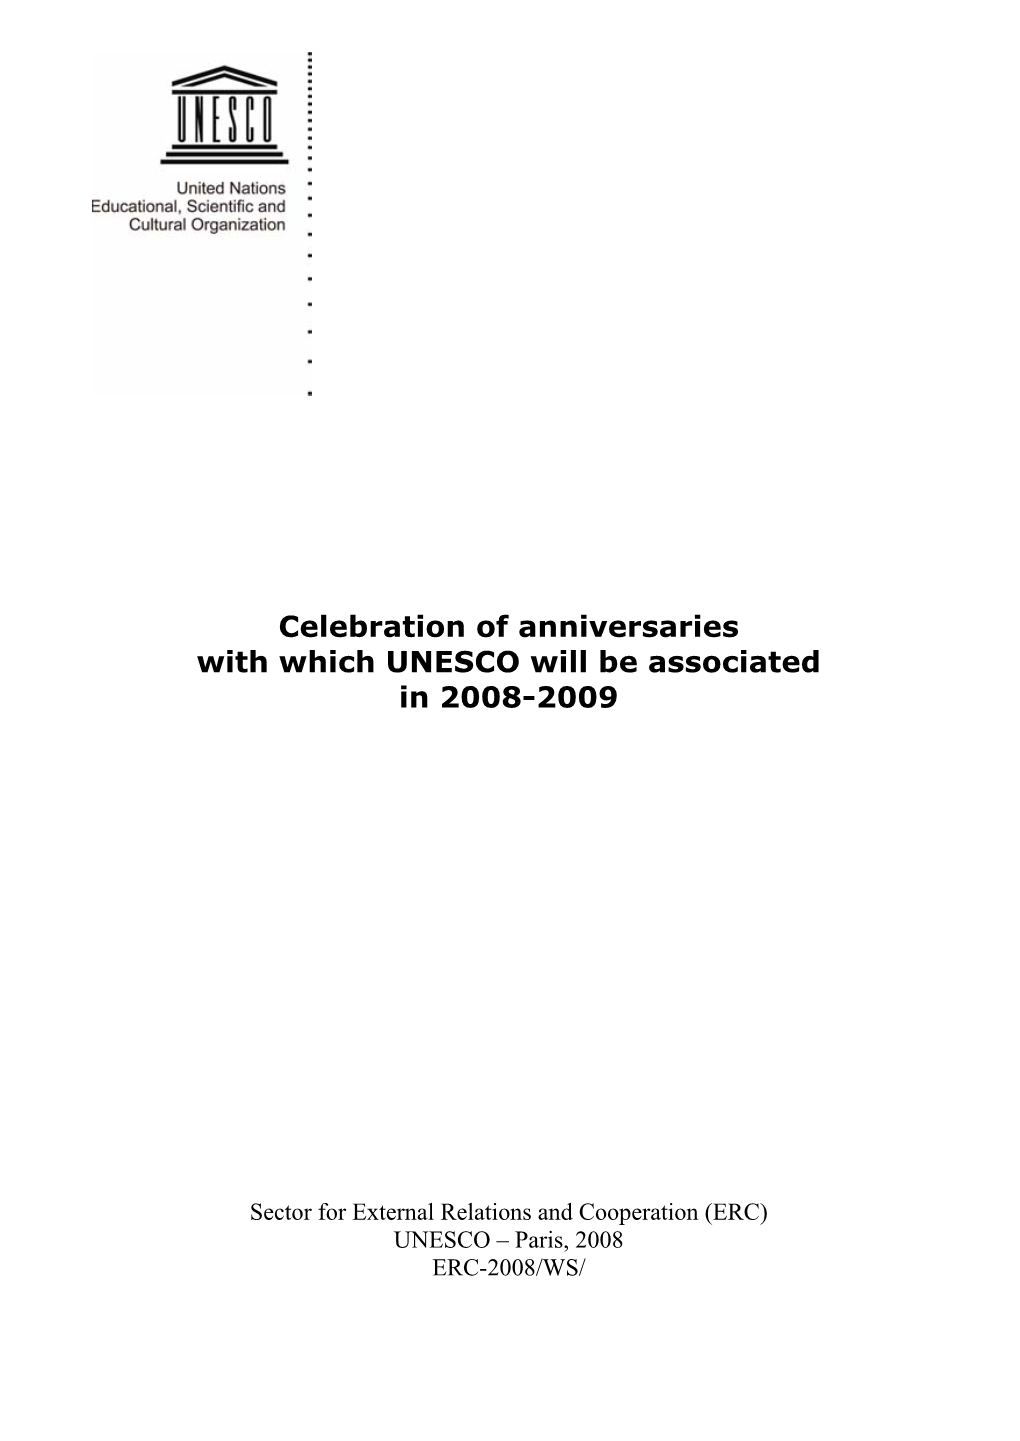 Celebration of Anniversaries with Which UNESCO Will Be Associated in 2008-2009